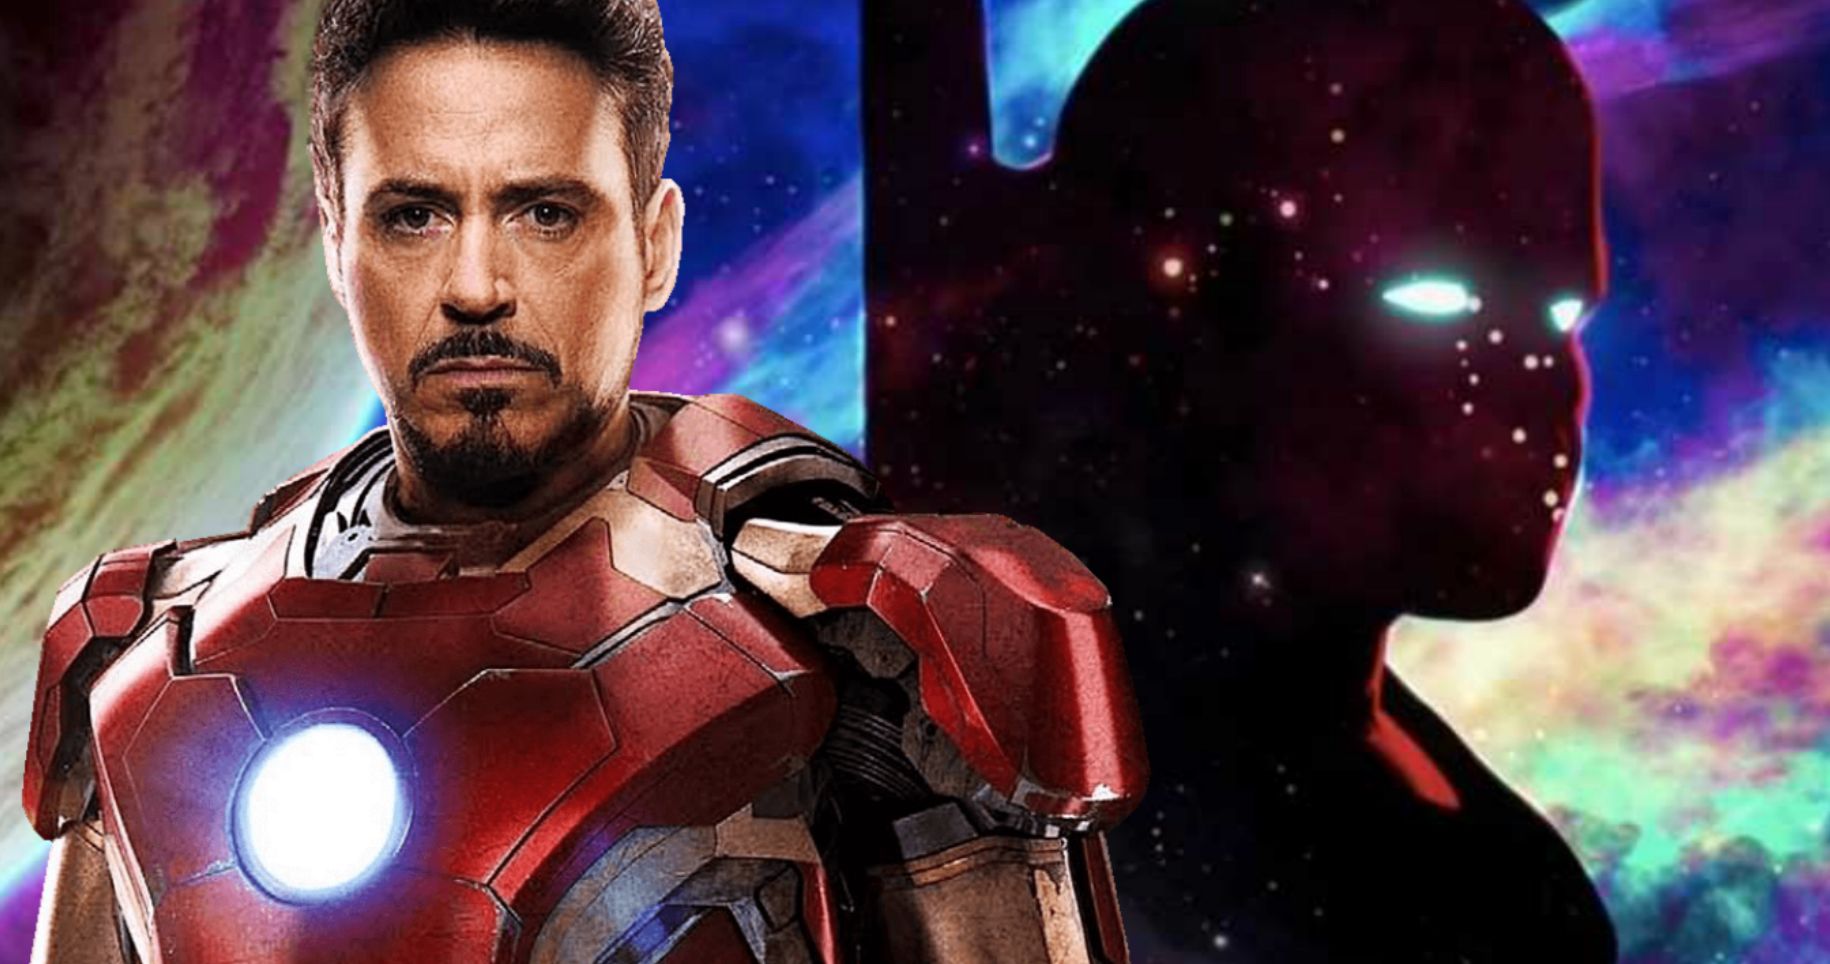 Robert Downey Jr. Will Return as Iron Man in Marvel's What If...?